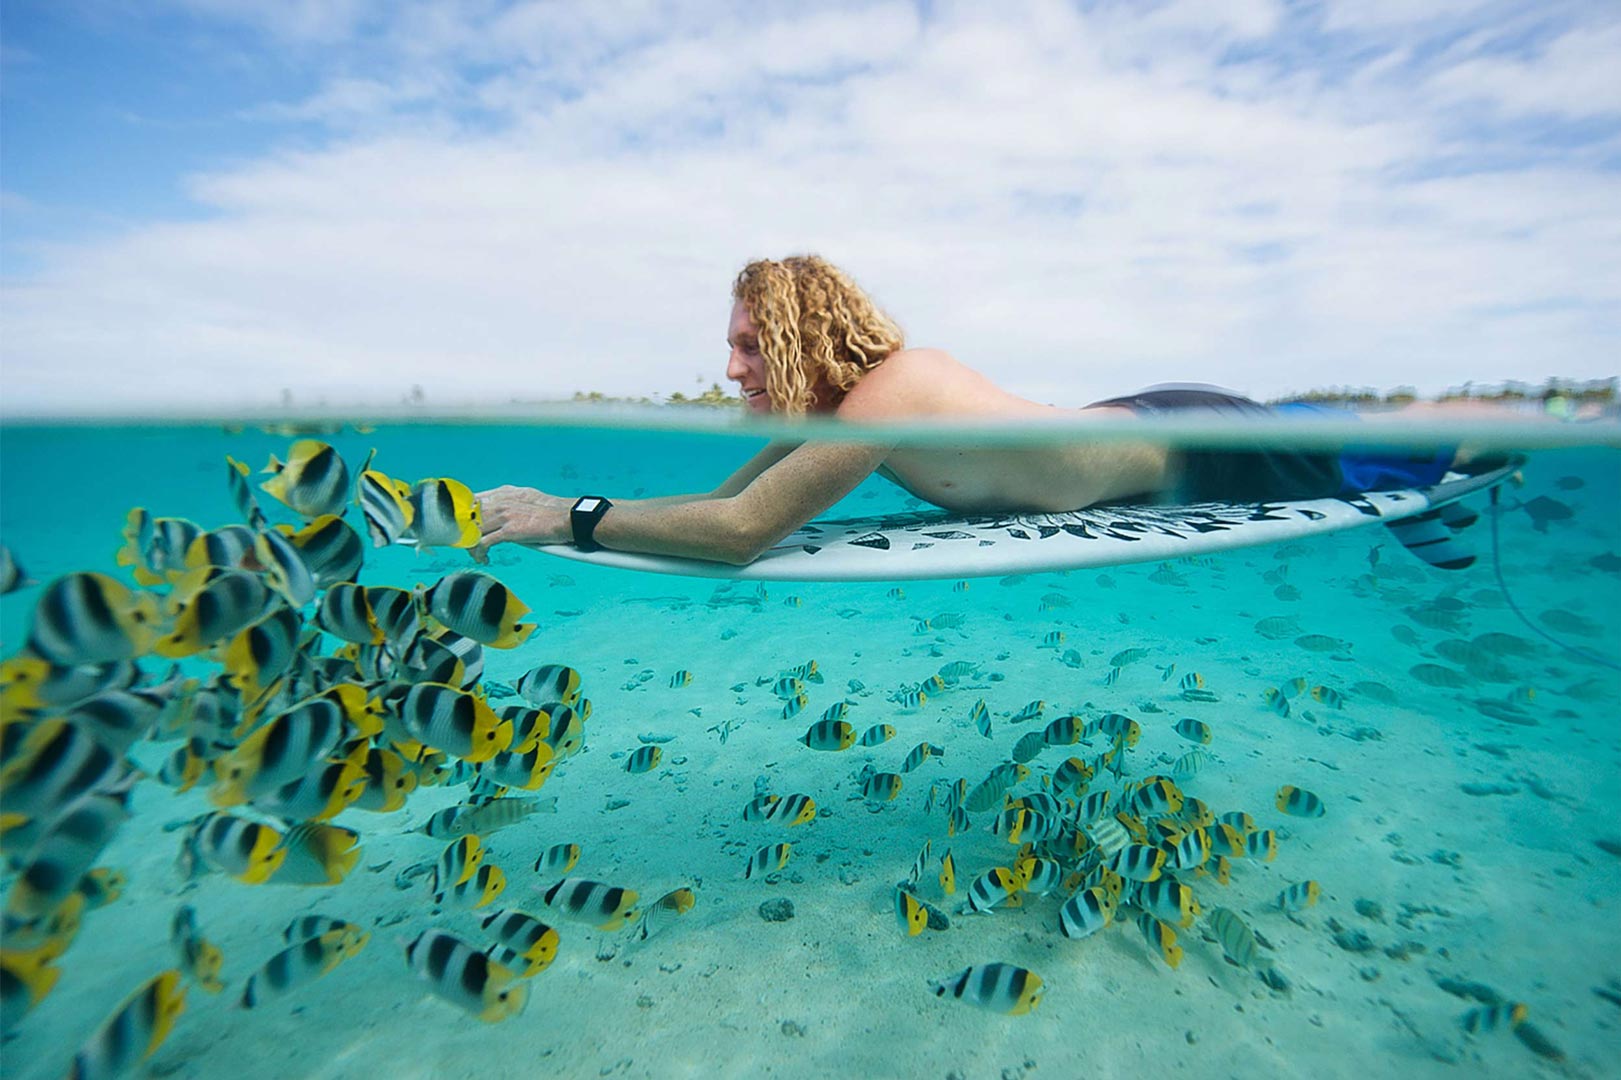  ACTIVE LIFESTYLE PHOTOGRAPHY Under over water photography - tropical fish + Rip Curl Surfer Luke Hynd 